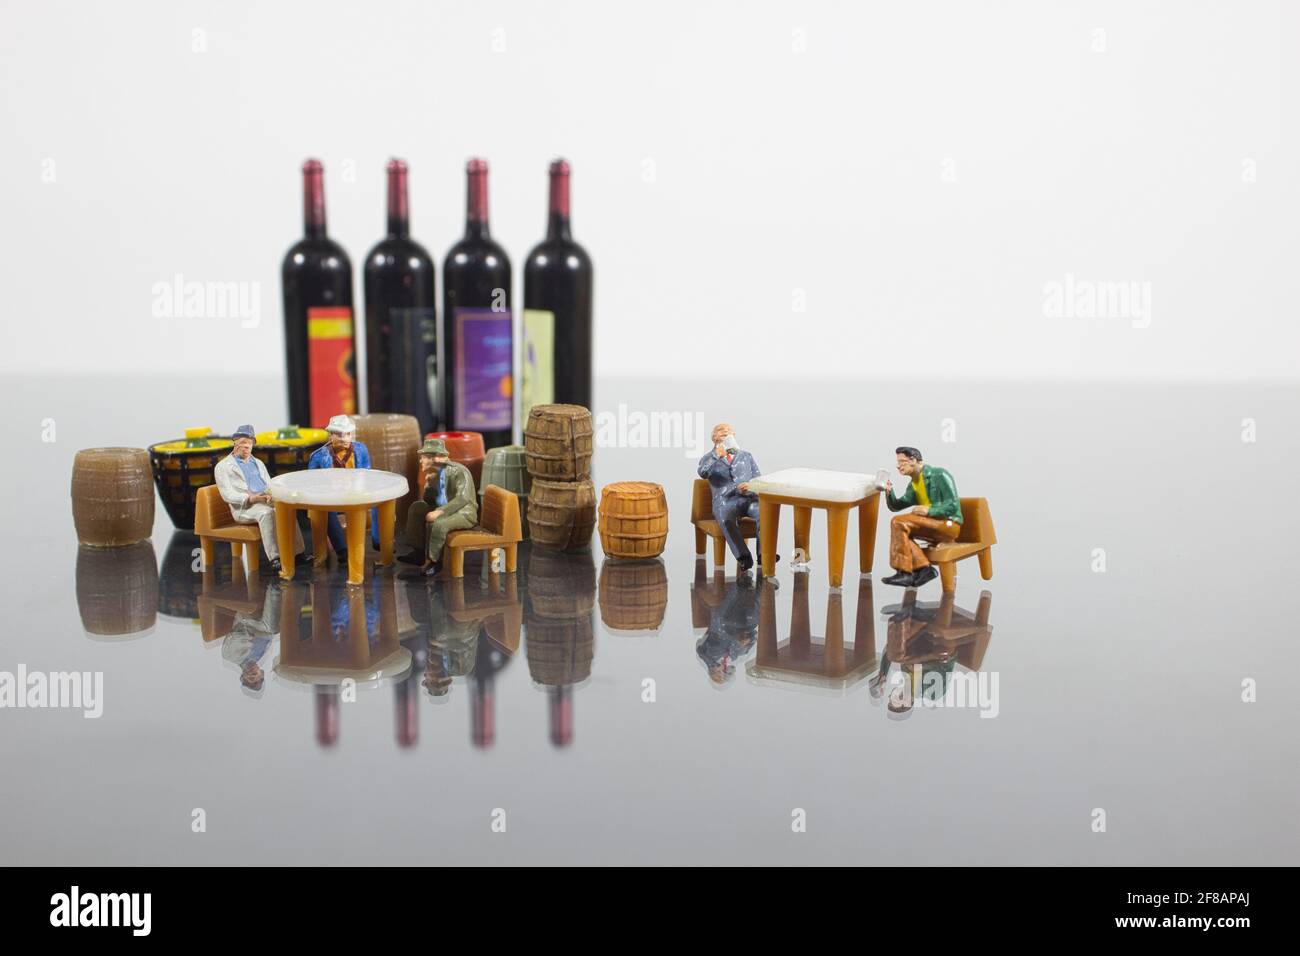 A minifigures of sitting around tables, surrounded by wine barrels and bottles Stock Photo